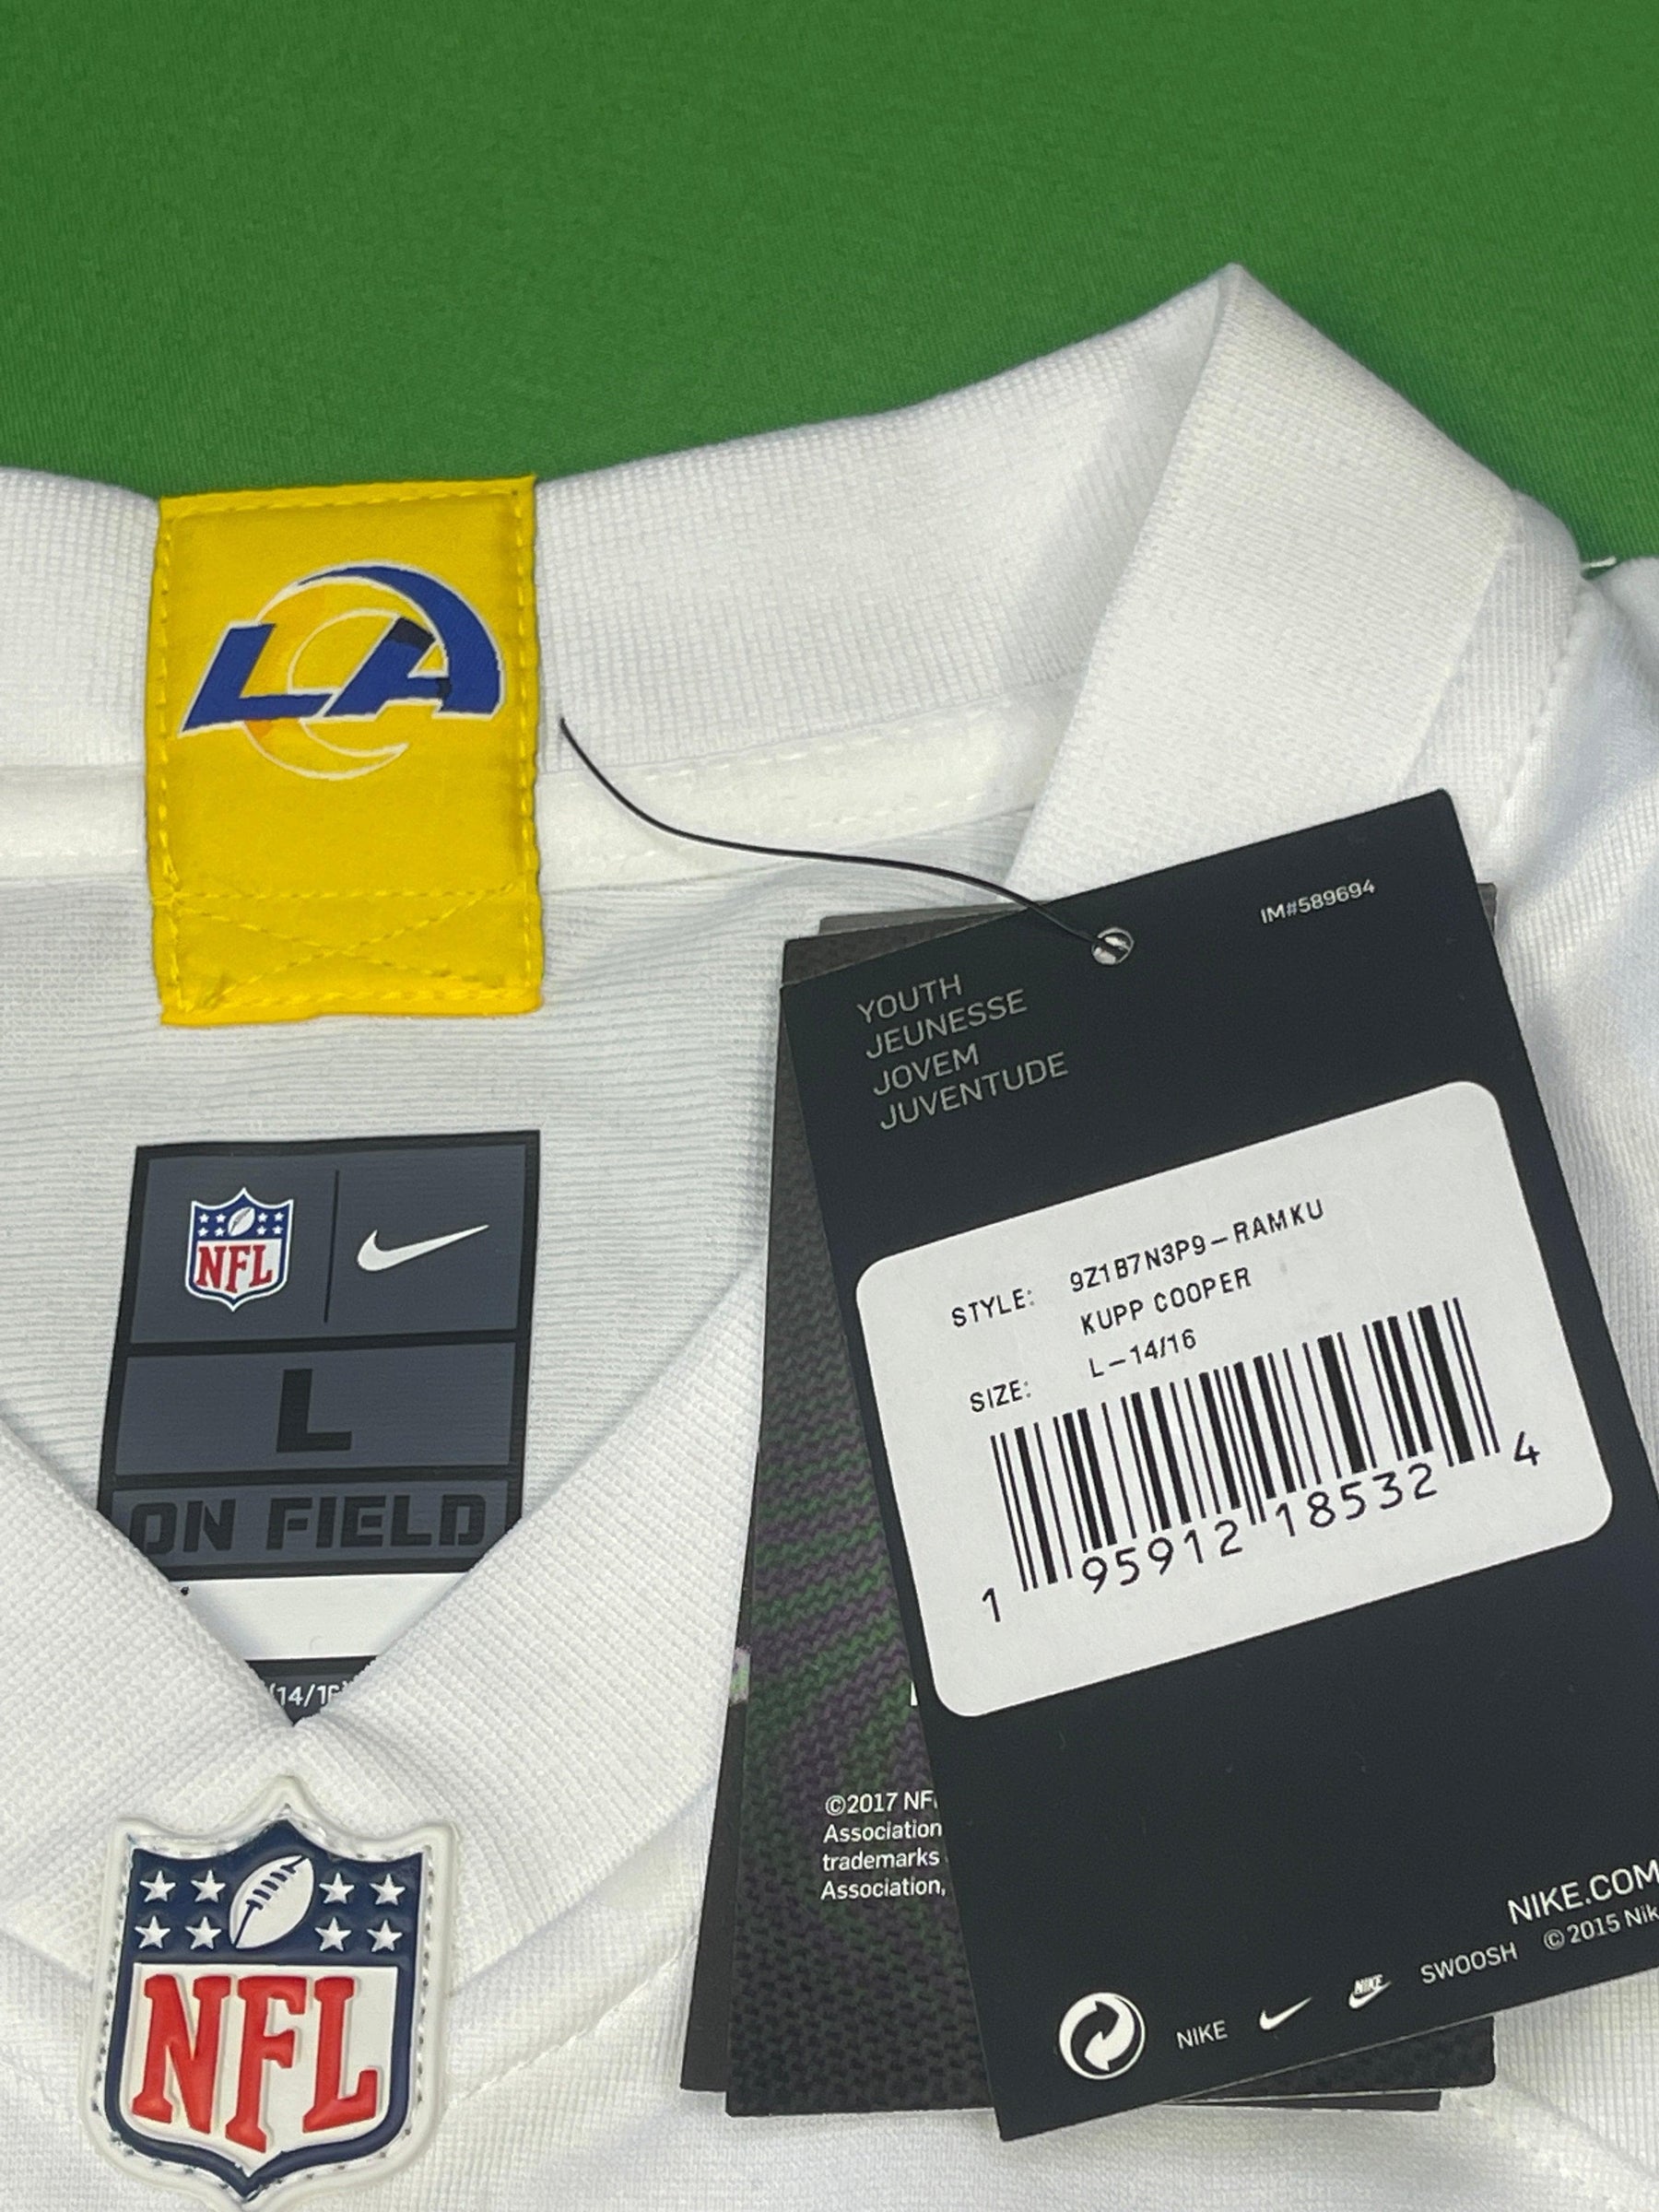 NFL Los Angeles Rams Cooper Kupp #10 Game Jersey Youth Large 14-16 NWT